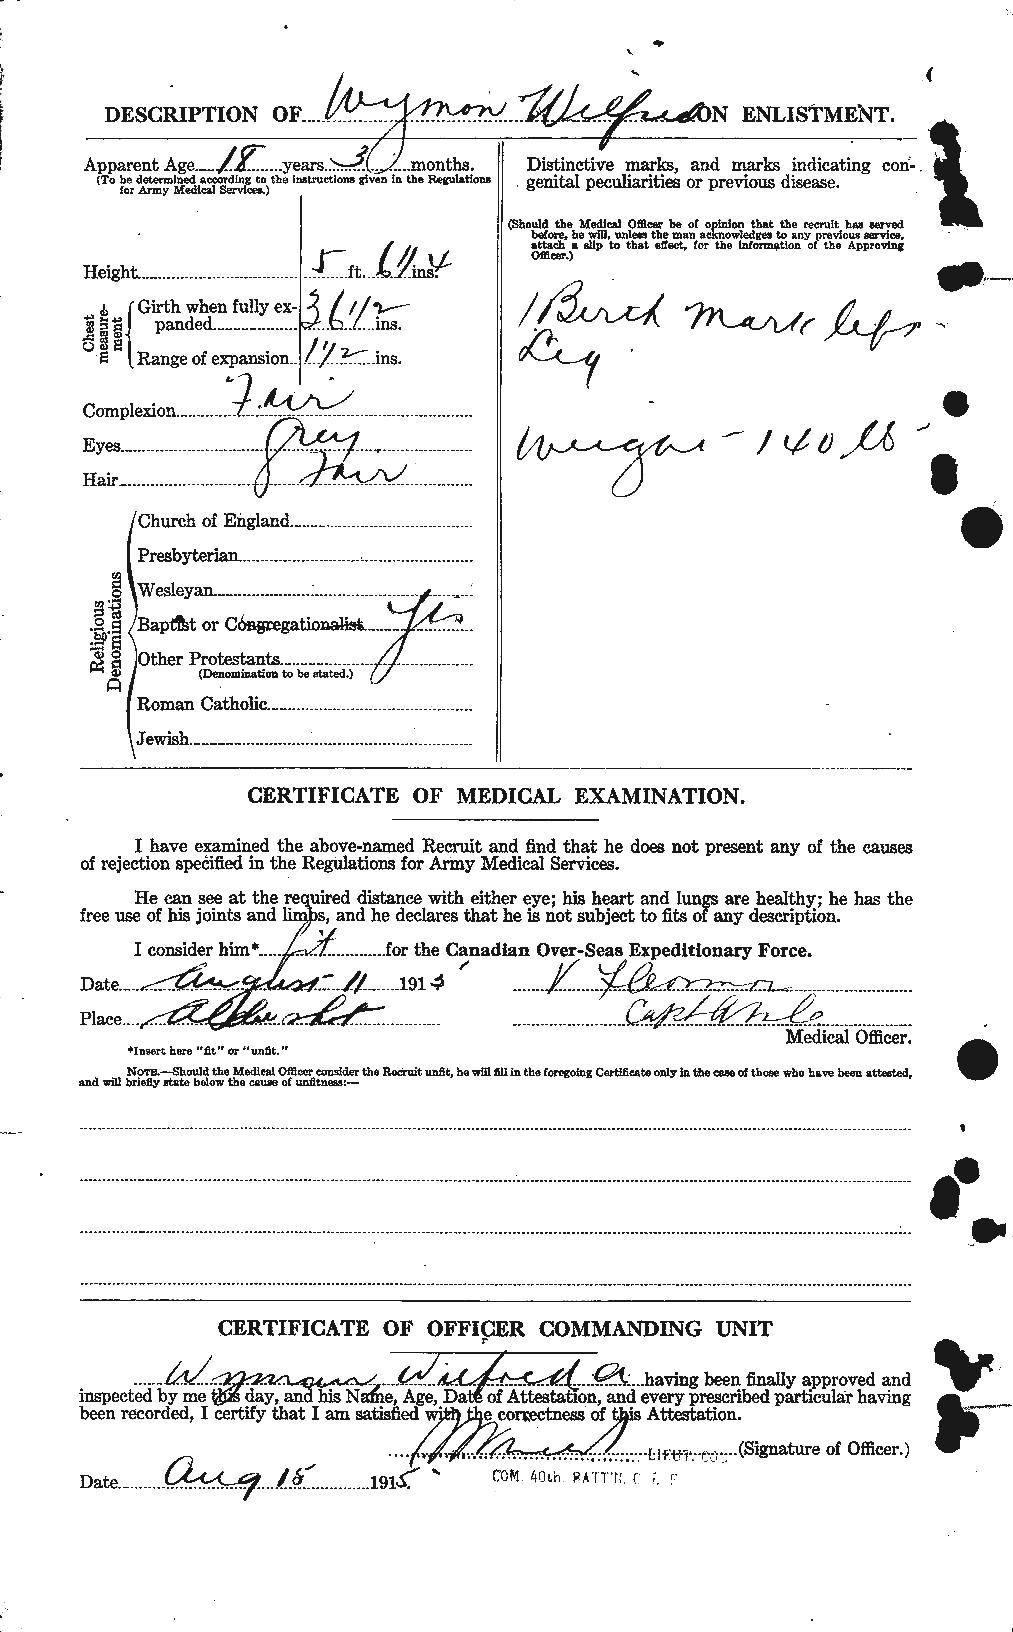 Personnel Records of the First World War - CEF 686860b